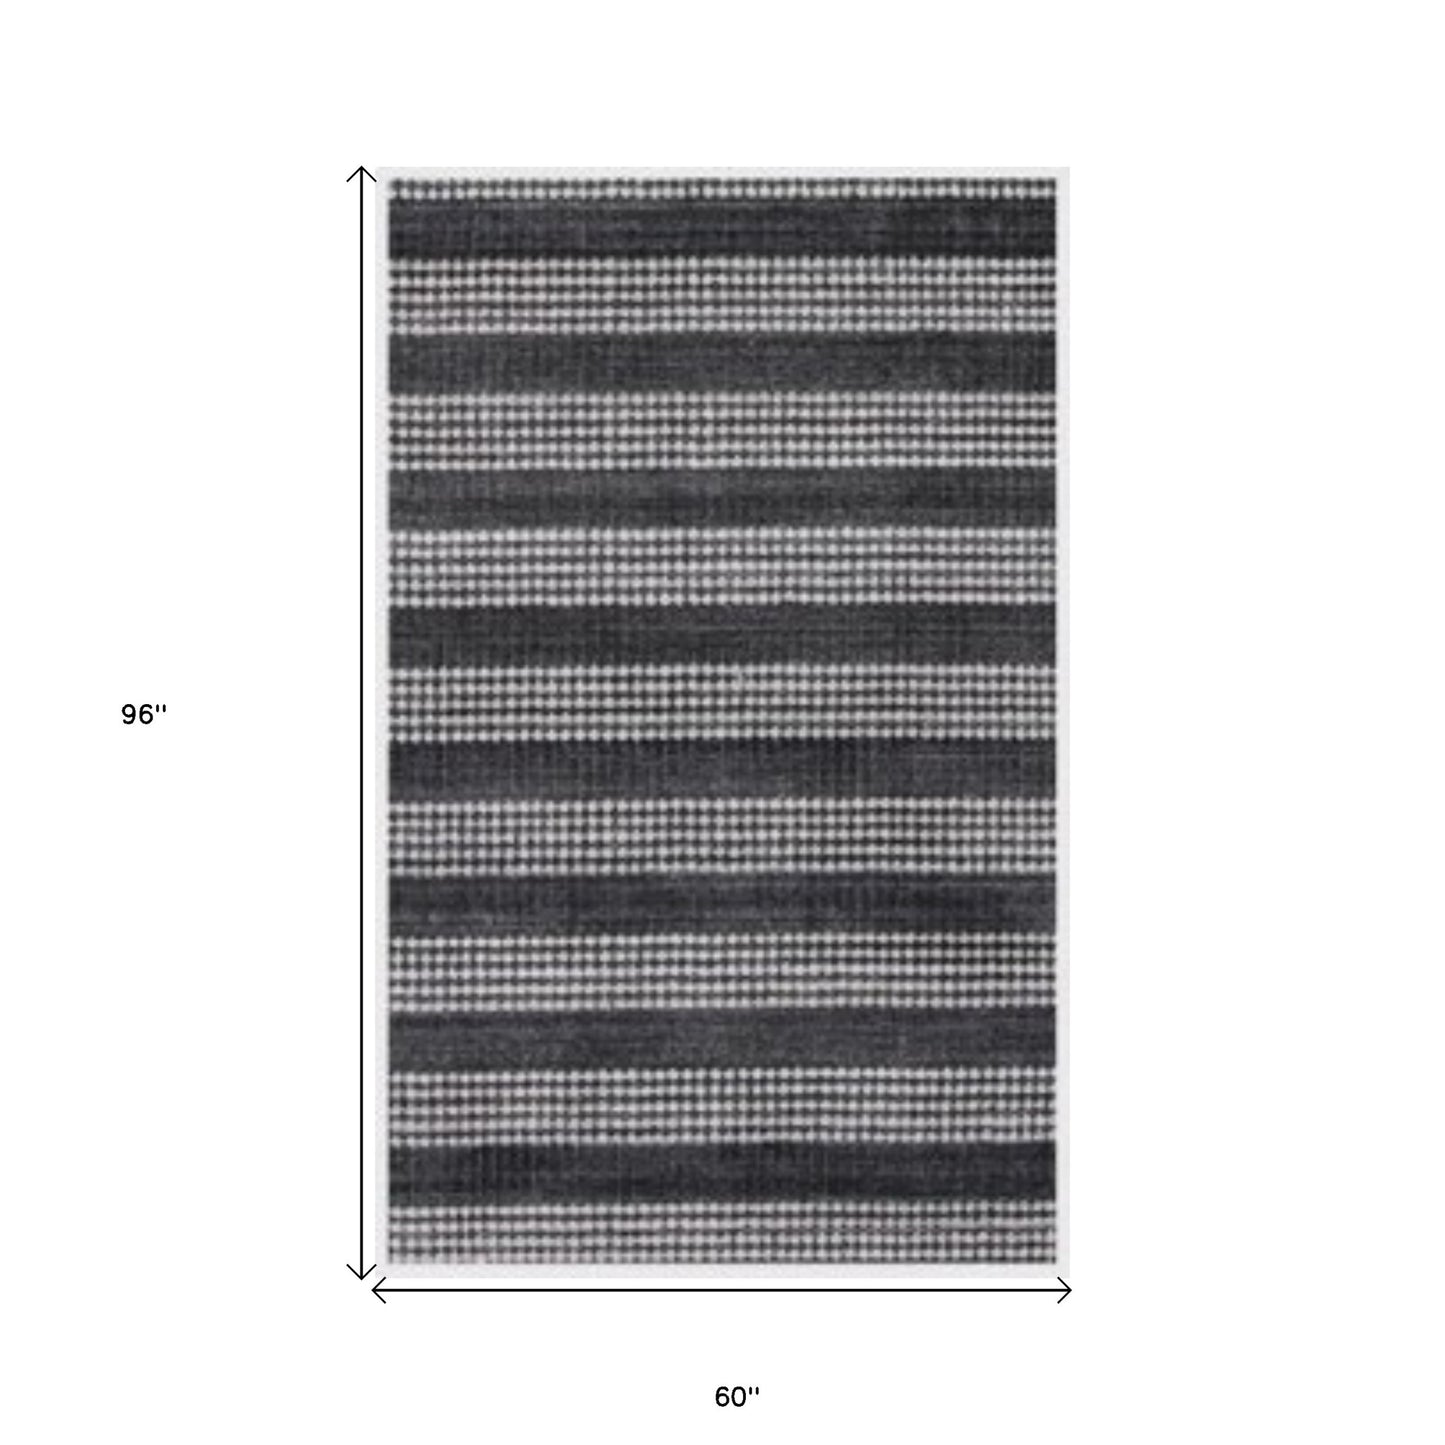 5' x 8' Black And White Striped Hand Loomed Area Rug